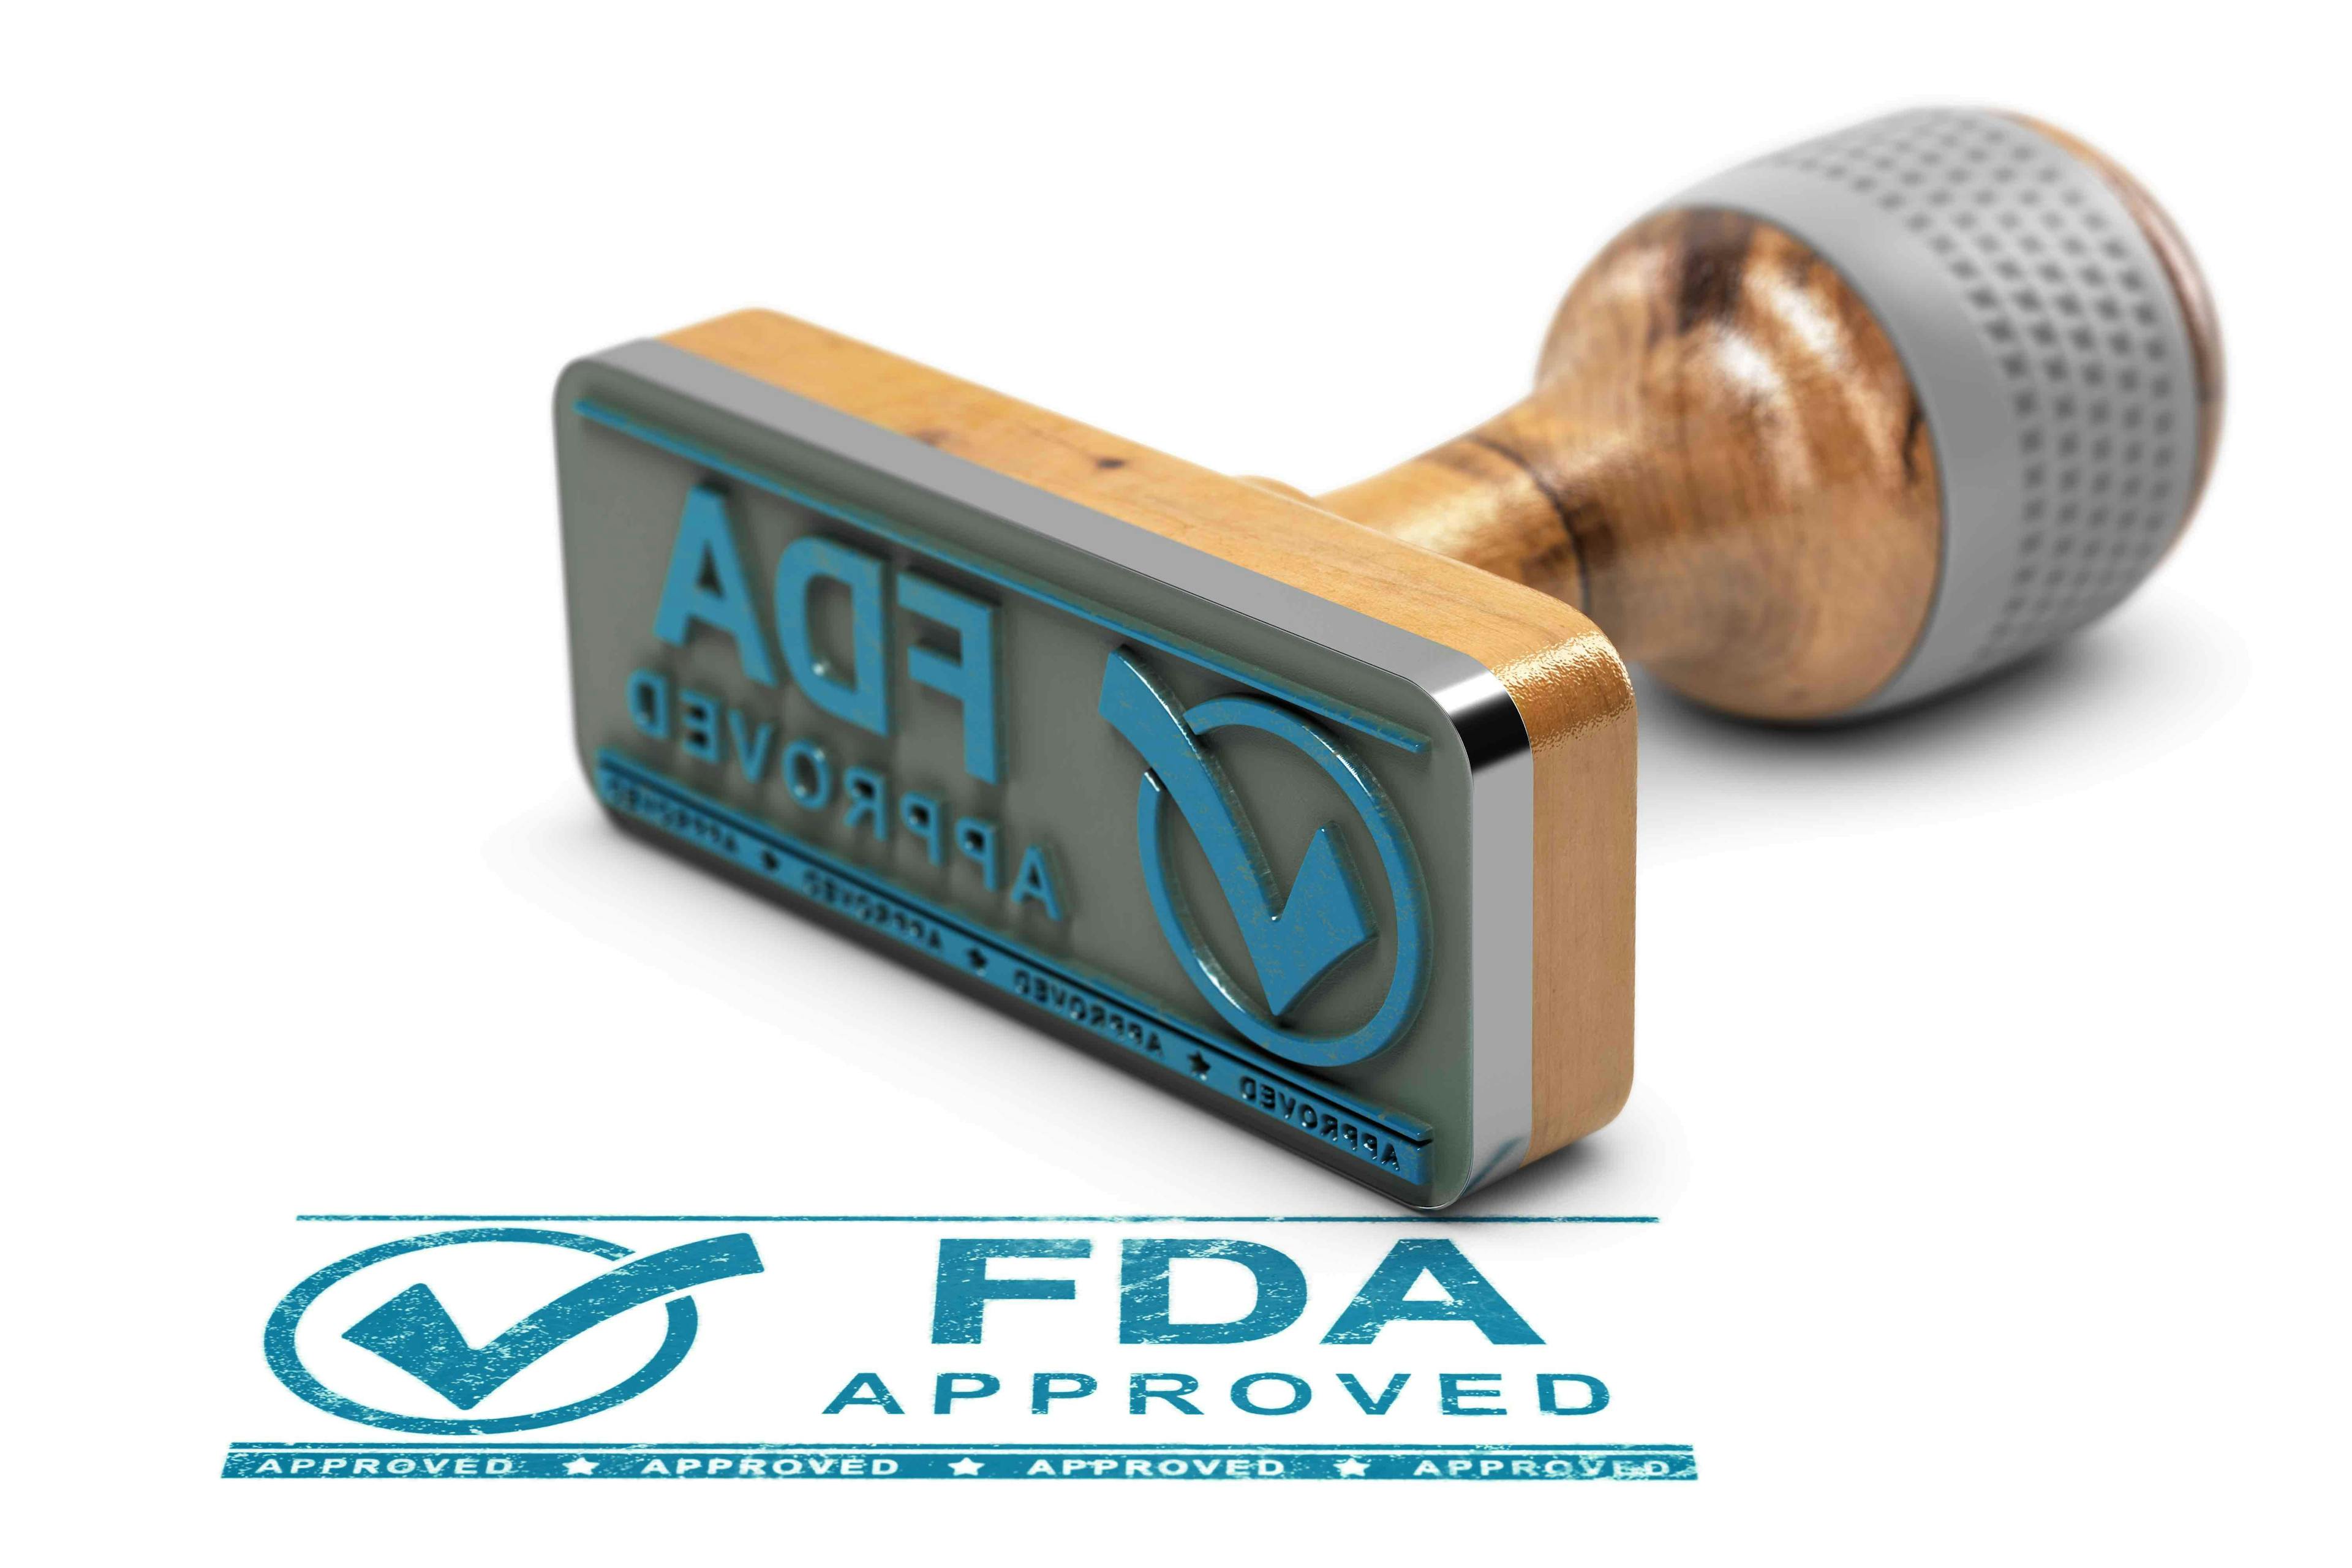 Blue FDA Approved stamp on white surface | Image credit: Olivier Le Moal - stock.adobe.com